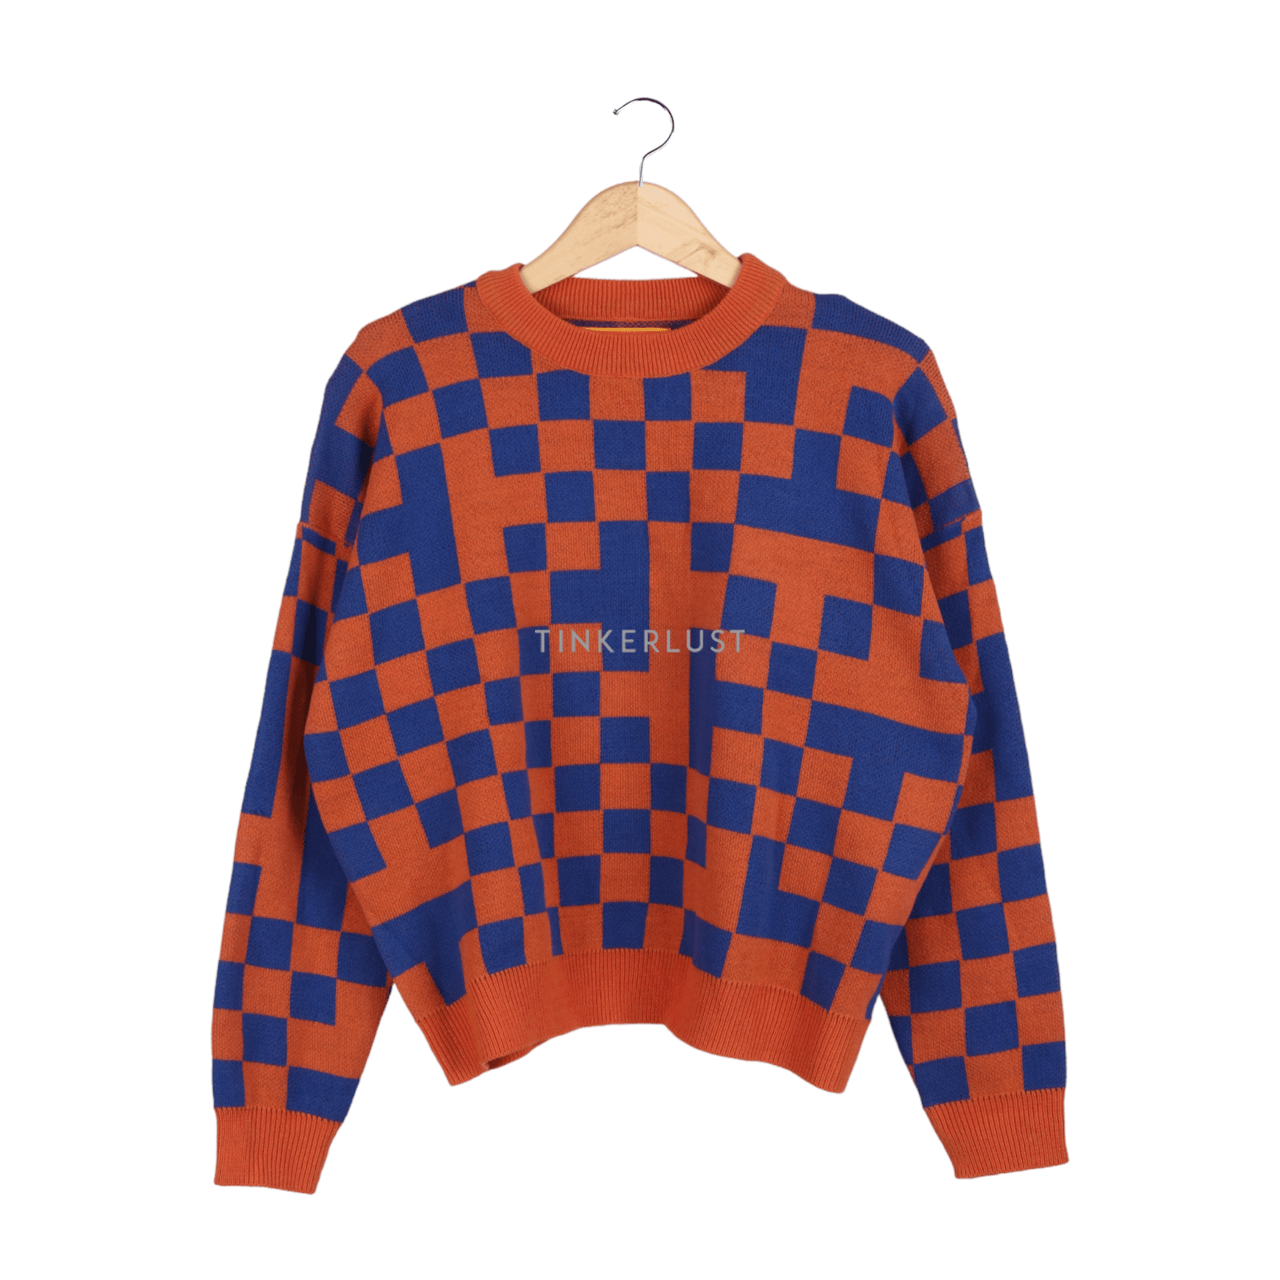 Play With Pattero Blue & Orange Sweater